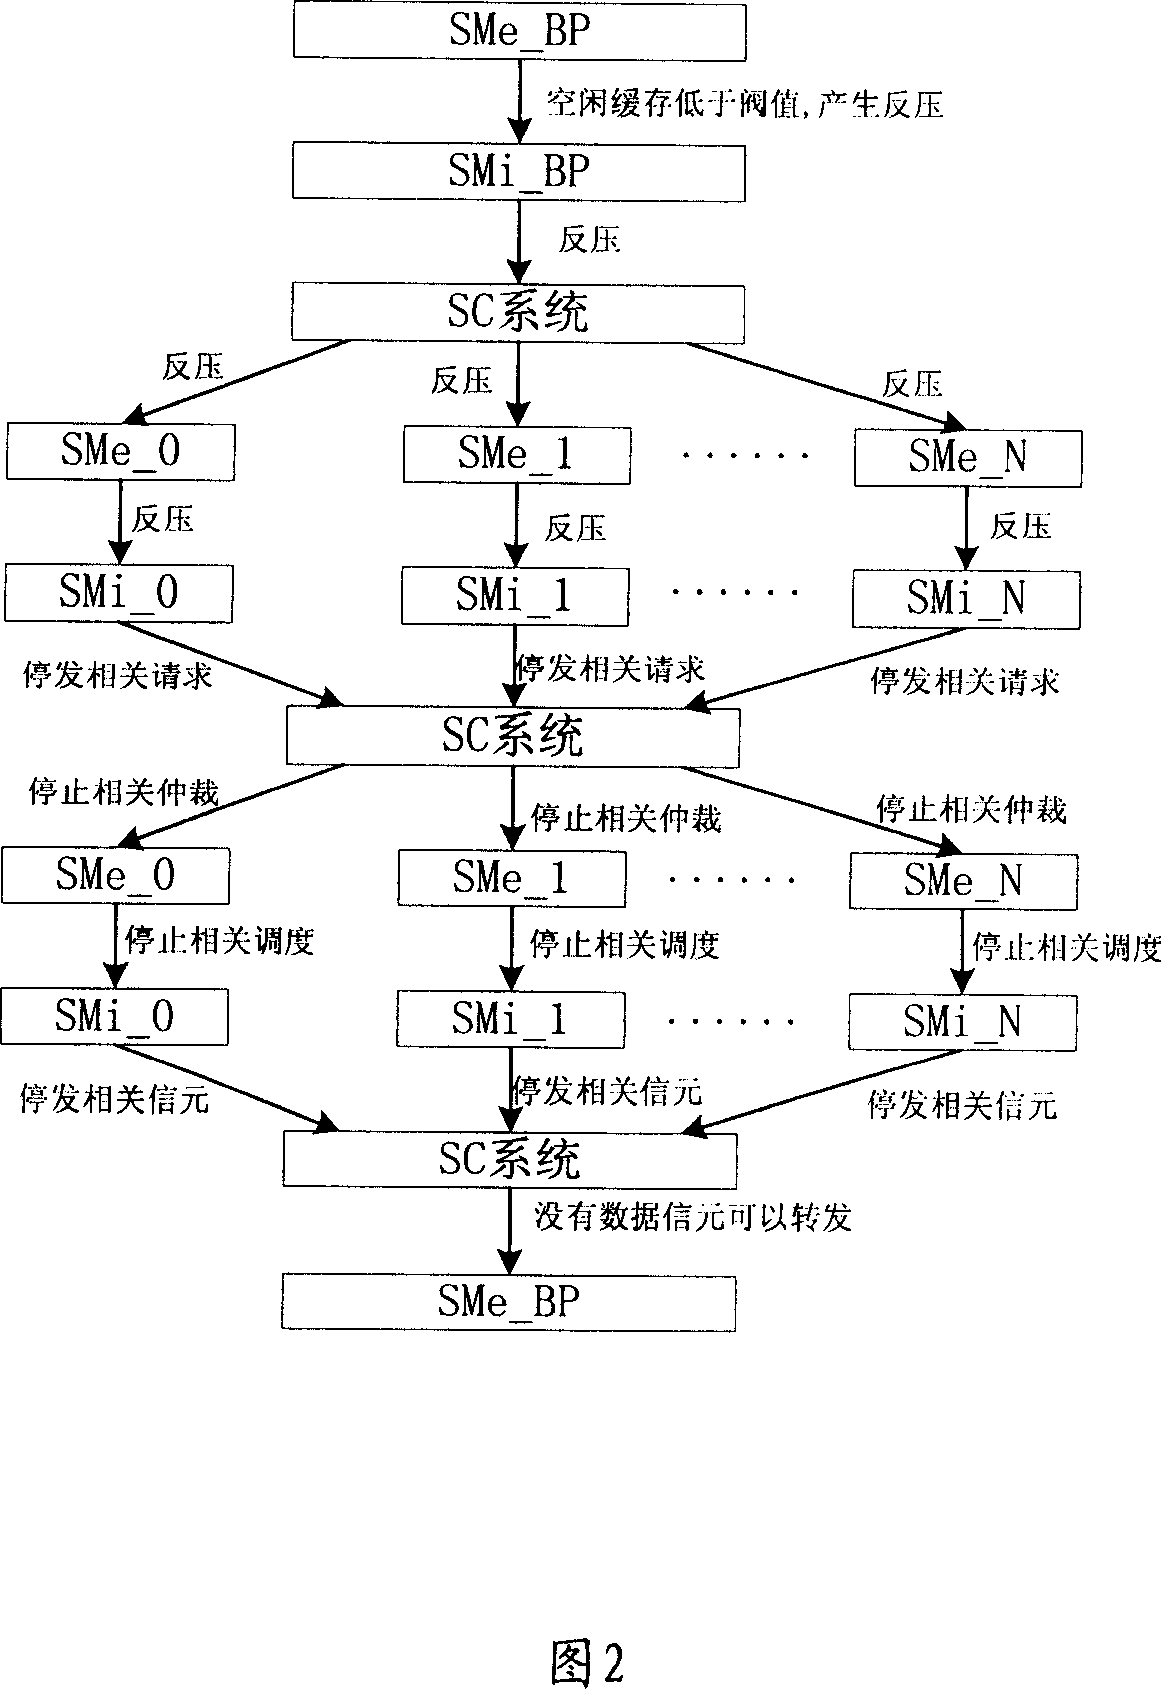 Flow control implementation method and device based on the output queue